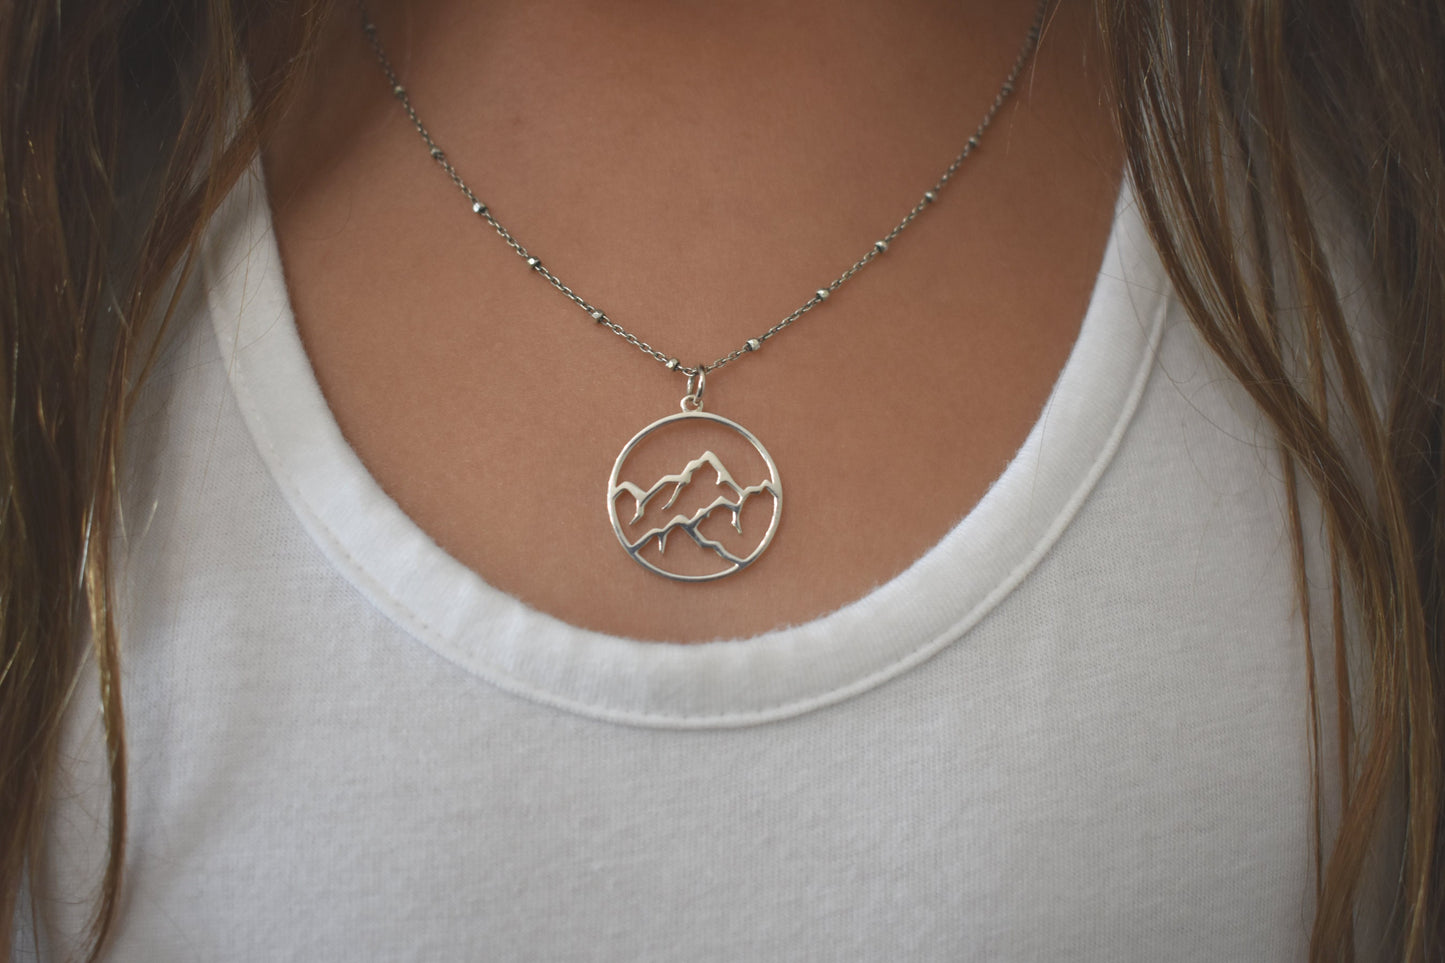 Earth Element Necklace- Earth Necklace, Four Elements, Taurus, Virgo, Capricorn Jewelry